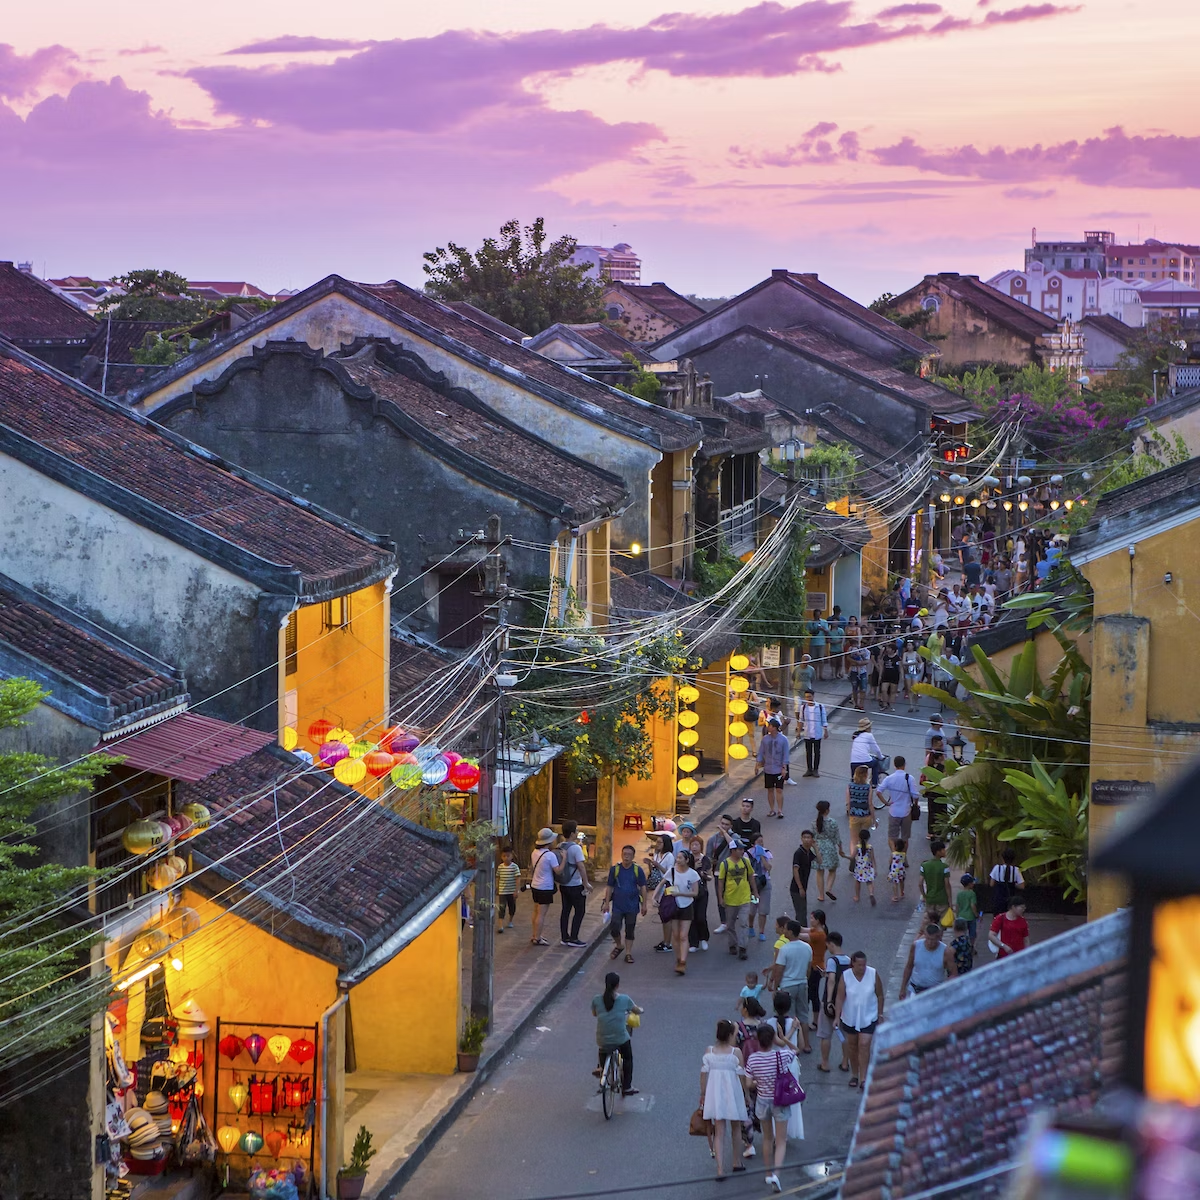 Travel Hoi An - Return to the peaceful land Ancient Town